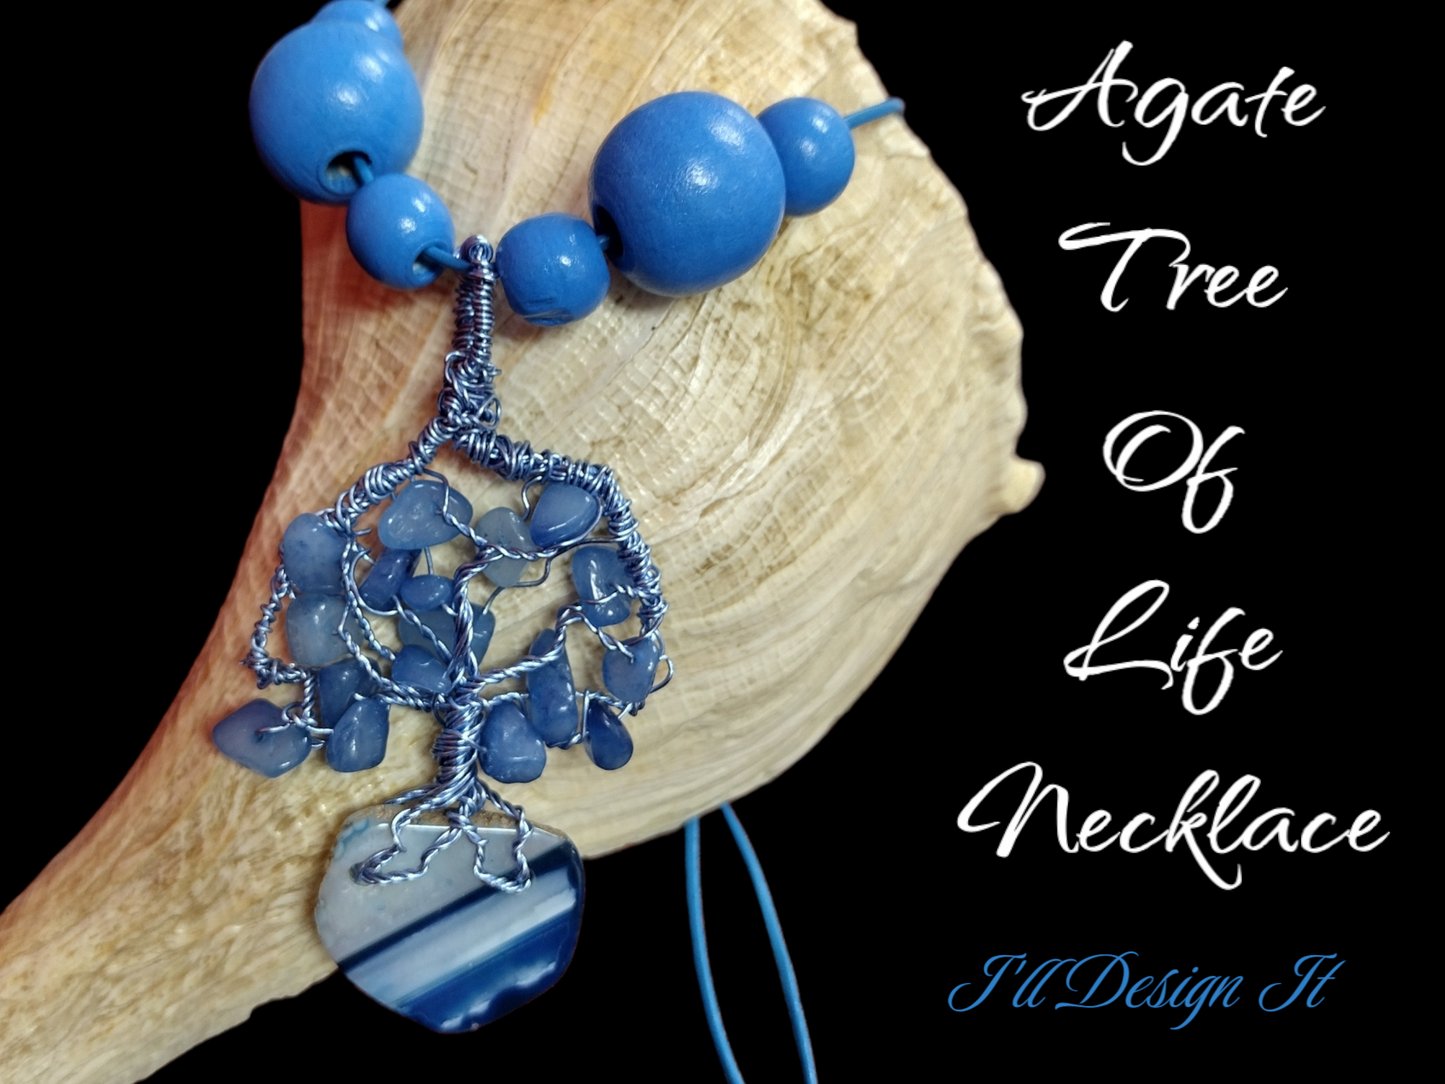 Agate tree of life necklace